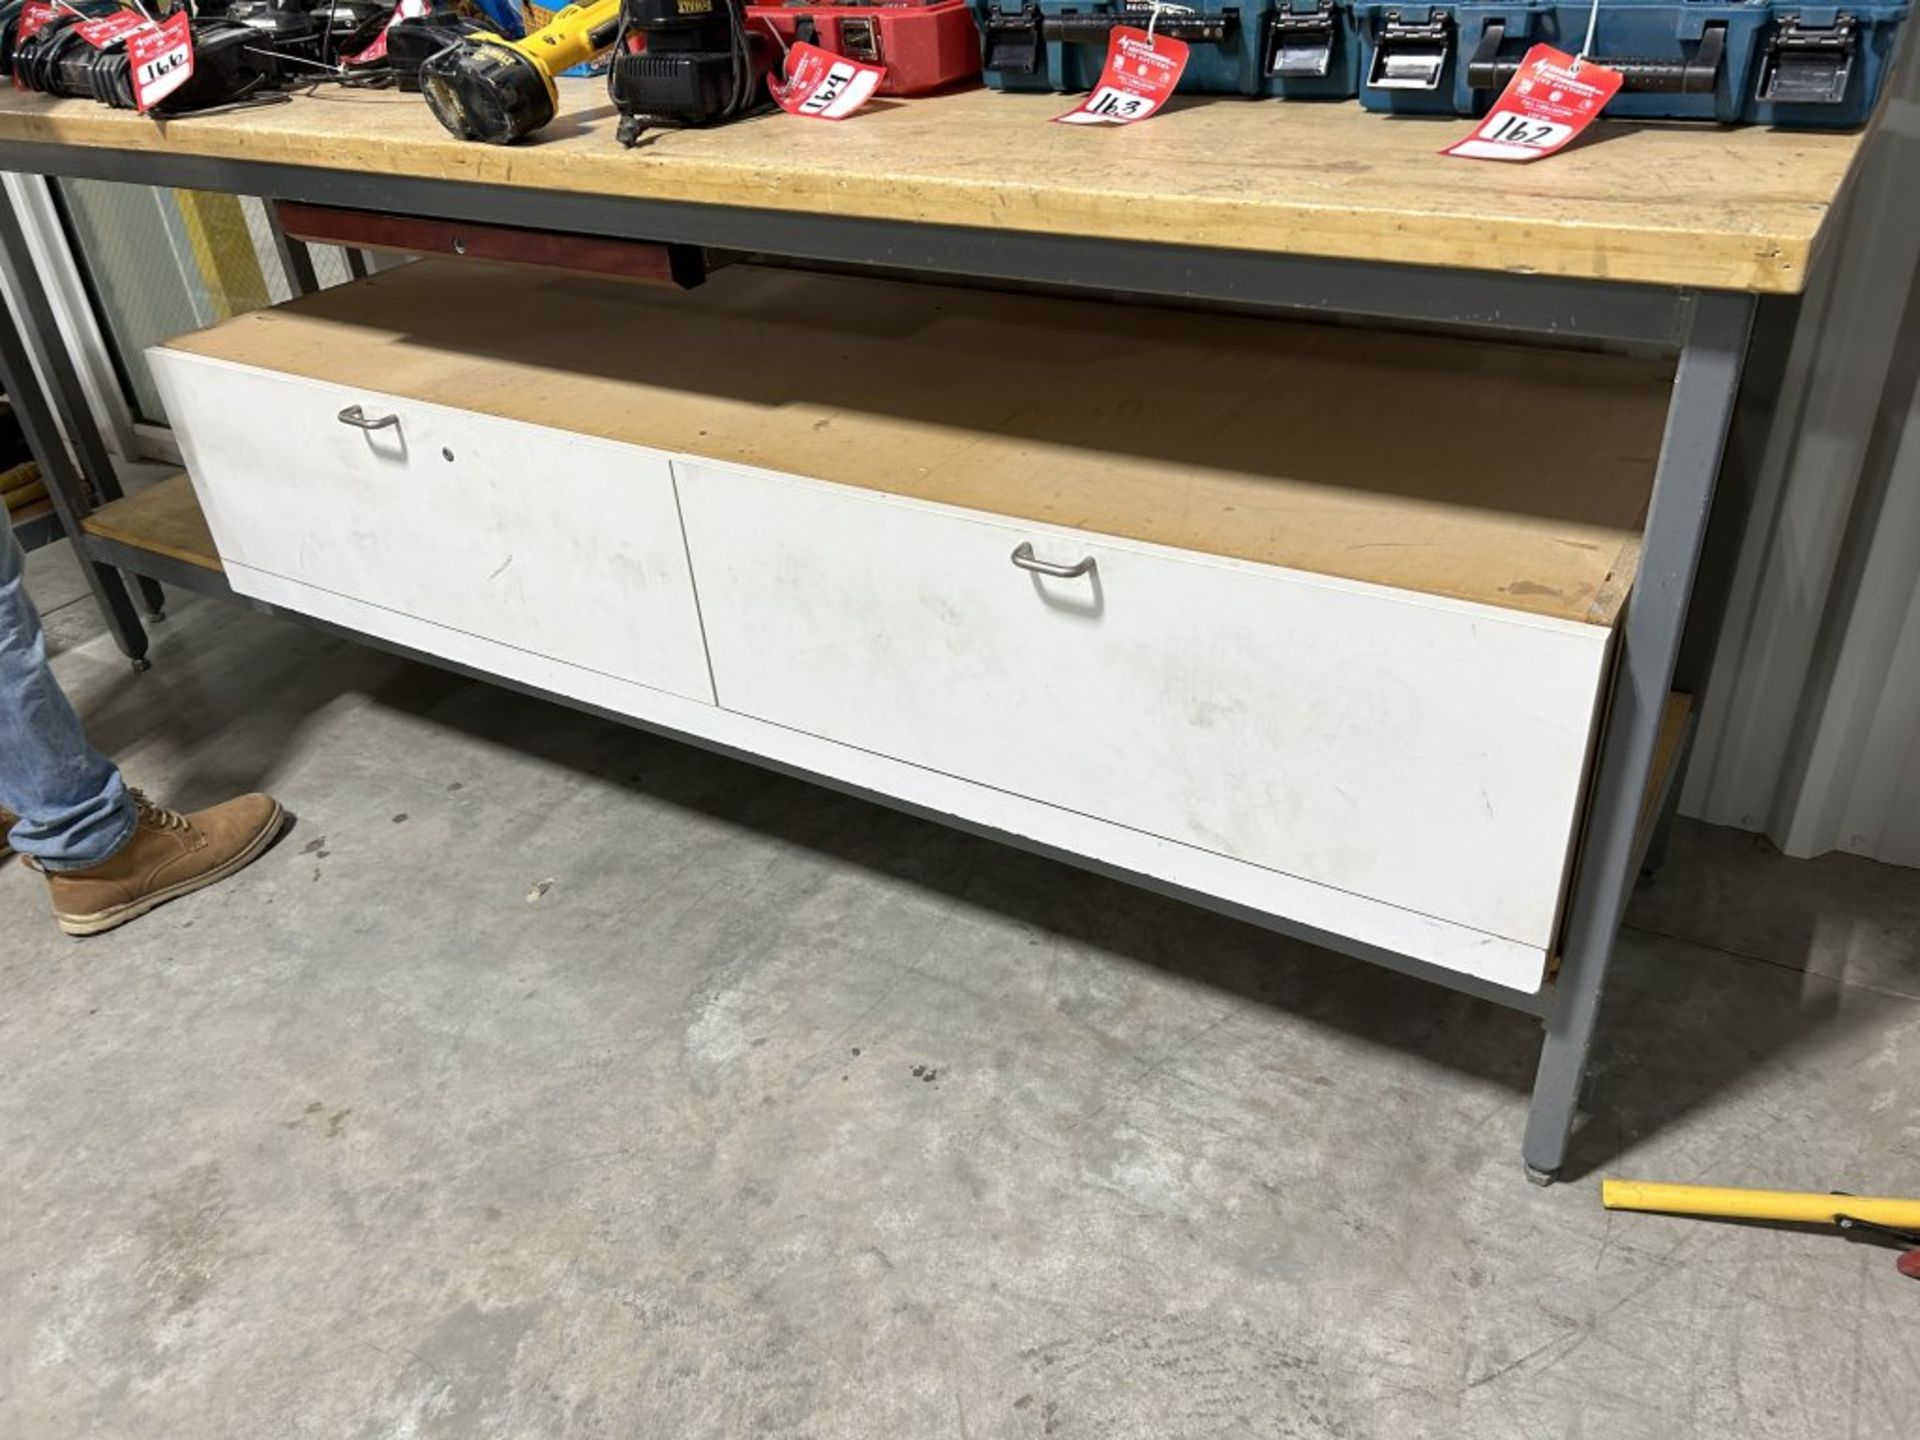 (2) 8'W X 24''D X 26''T WORK BENCHES, METAL FRAMES WITH WOOD TOPS - Image 4 of 7